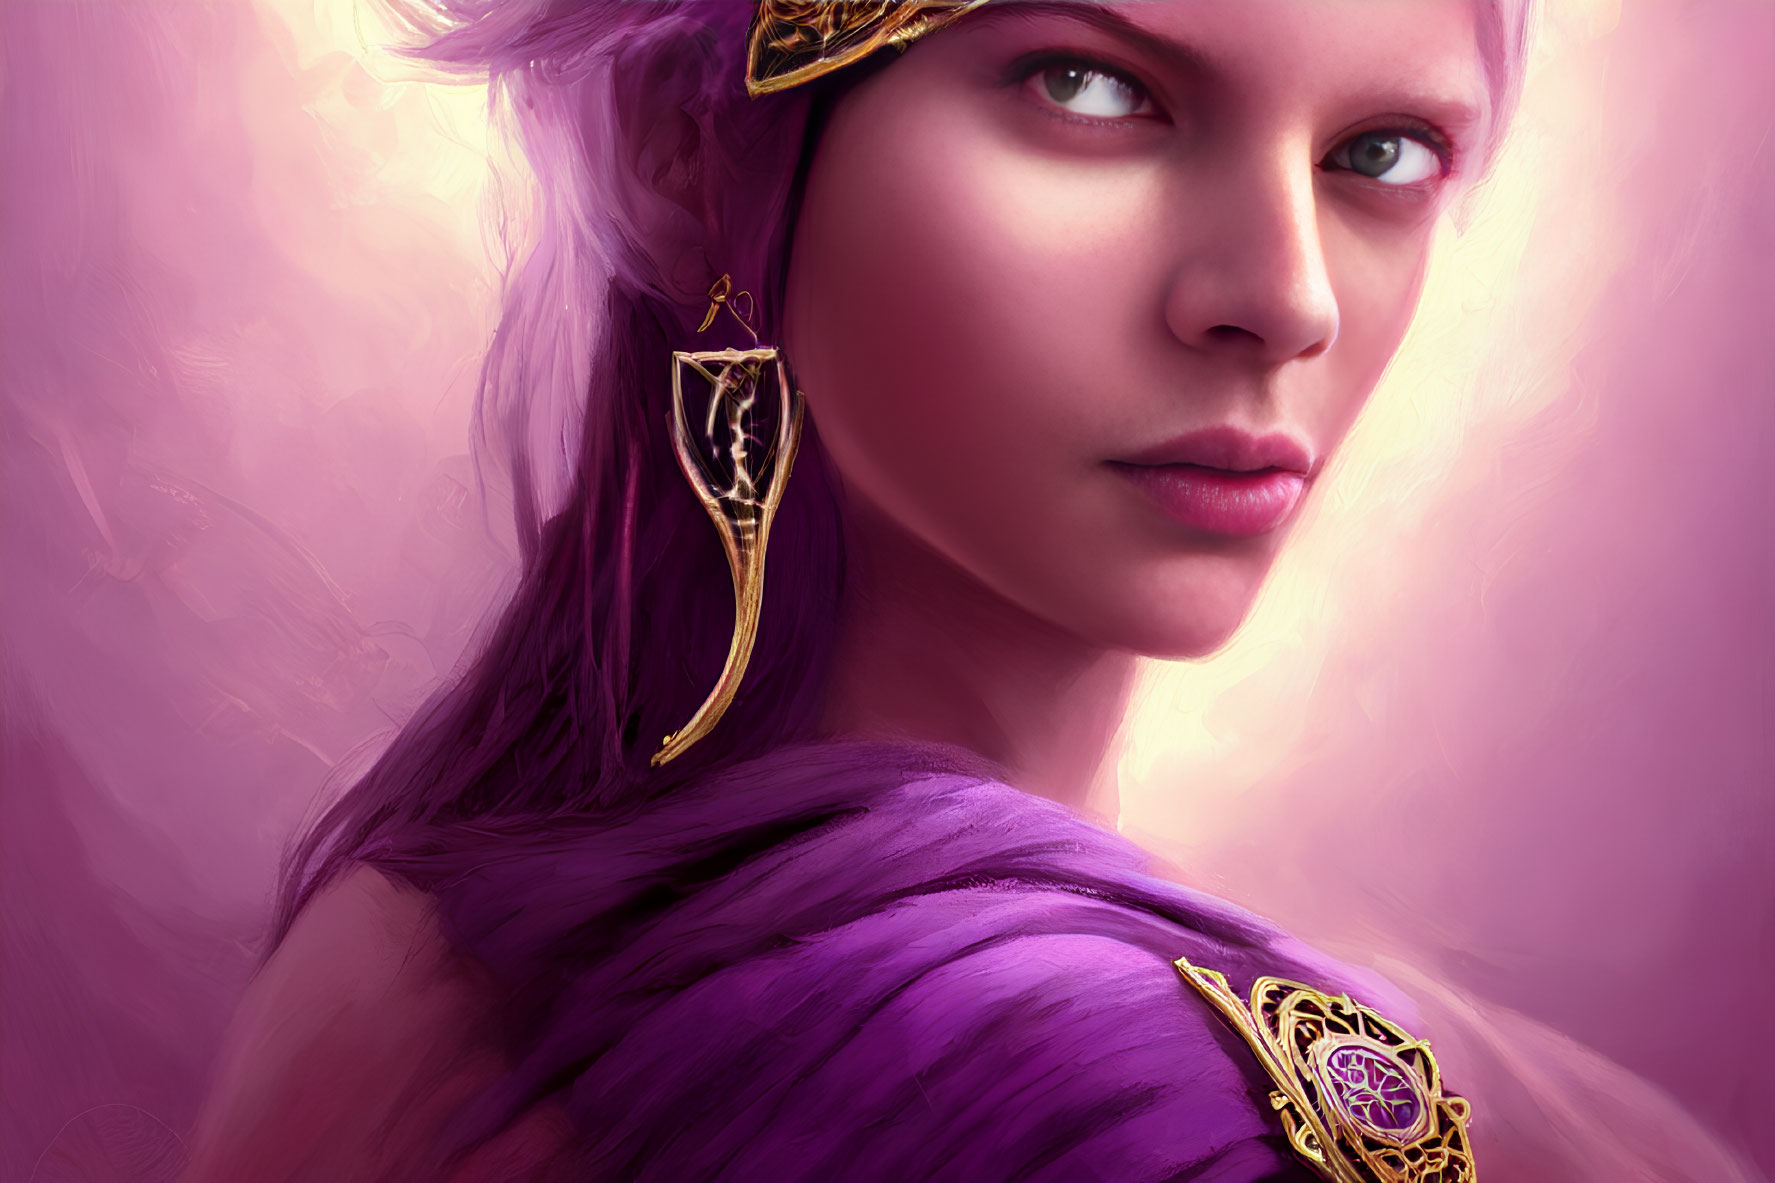 Digital artwork of a woman in purple cloak and gold jewelry on pink background